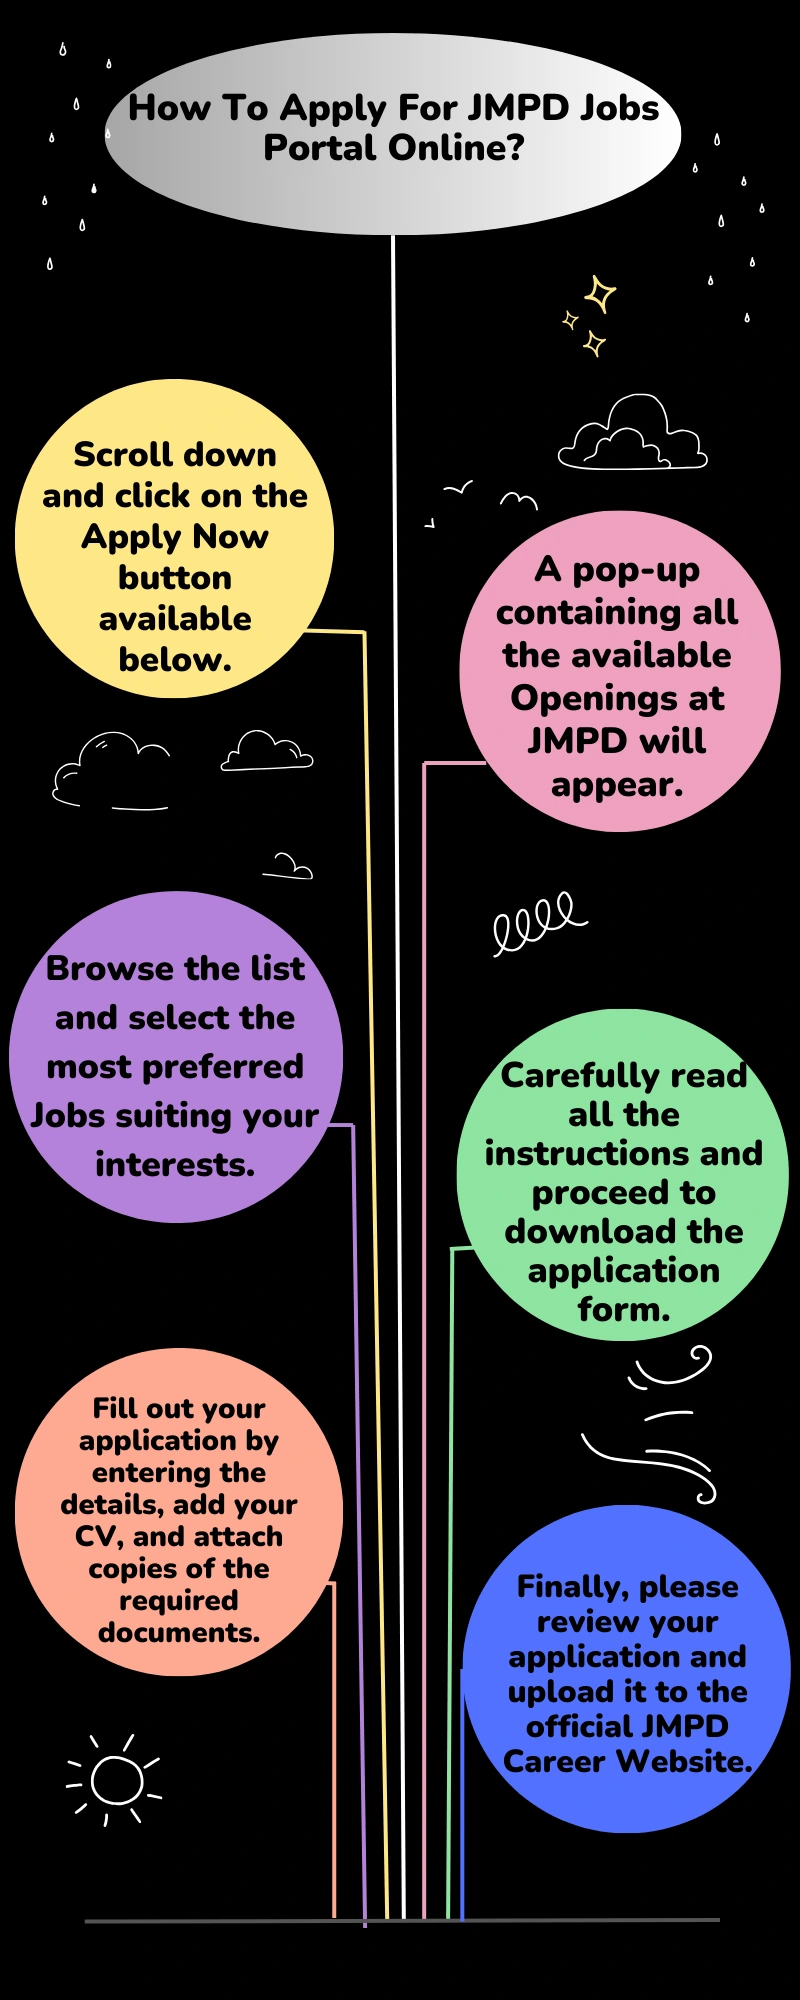 How To Apply For JMPD Jobs Portal Online?